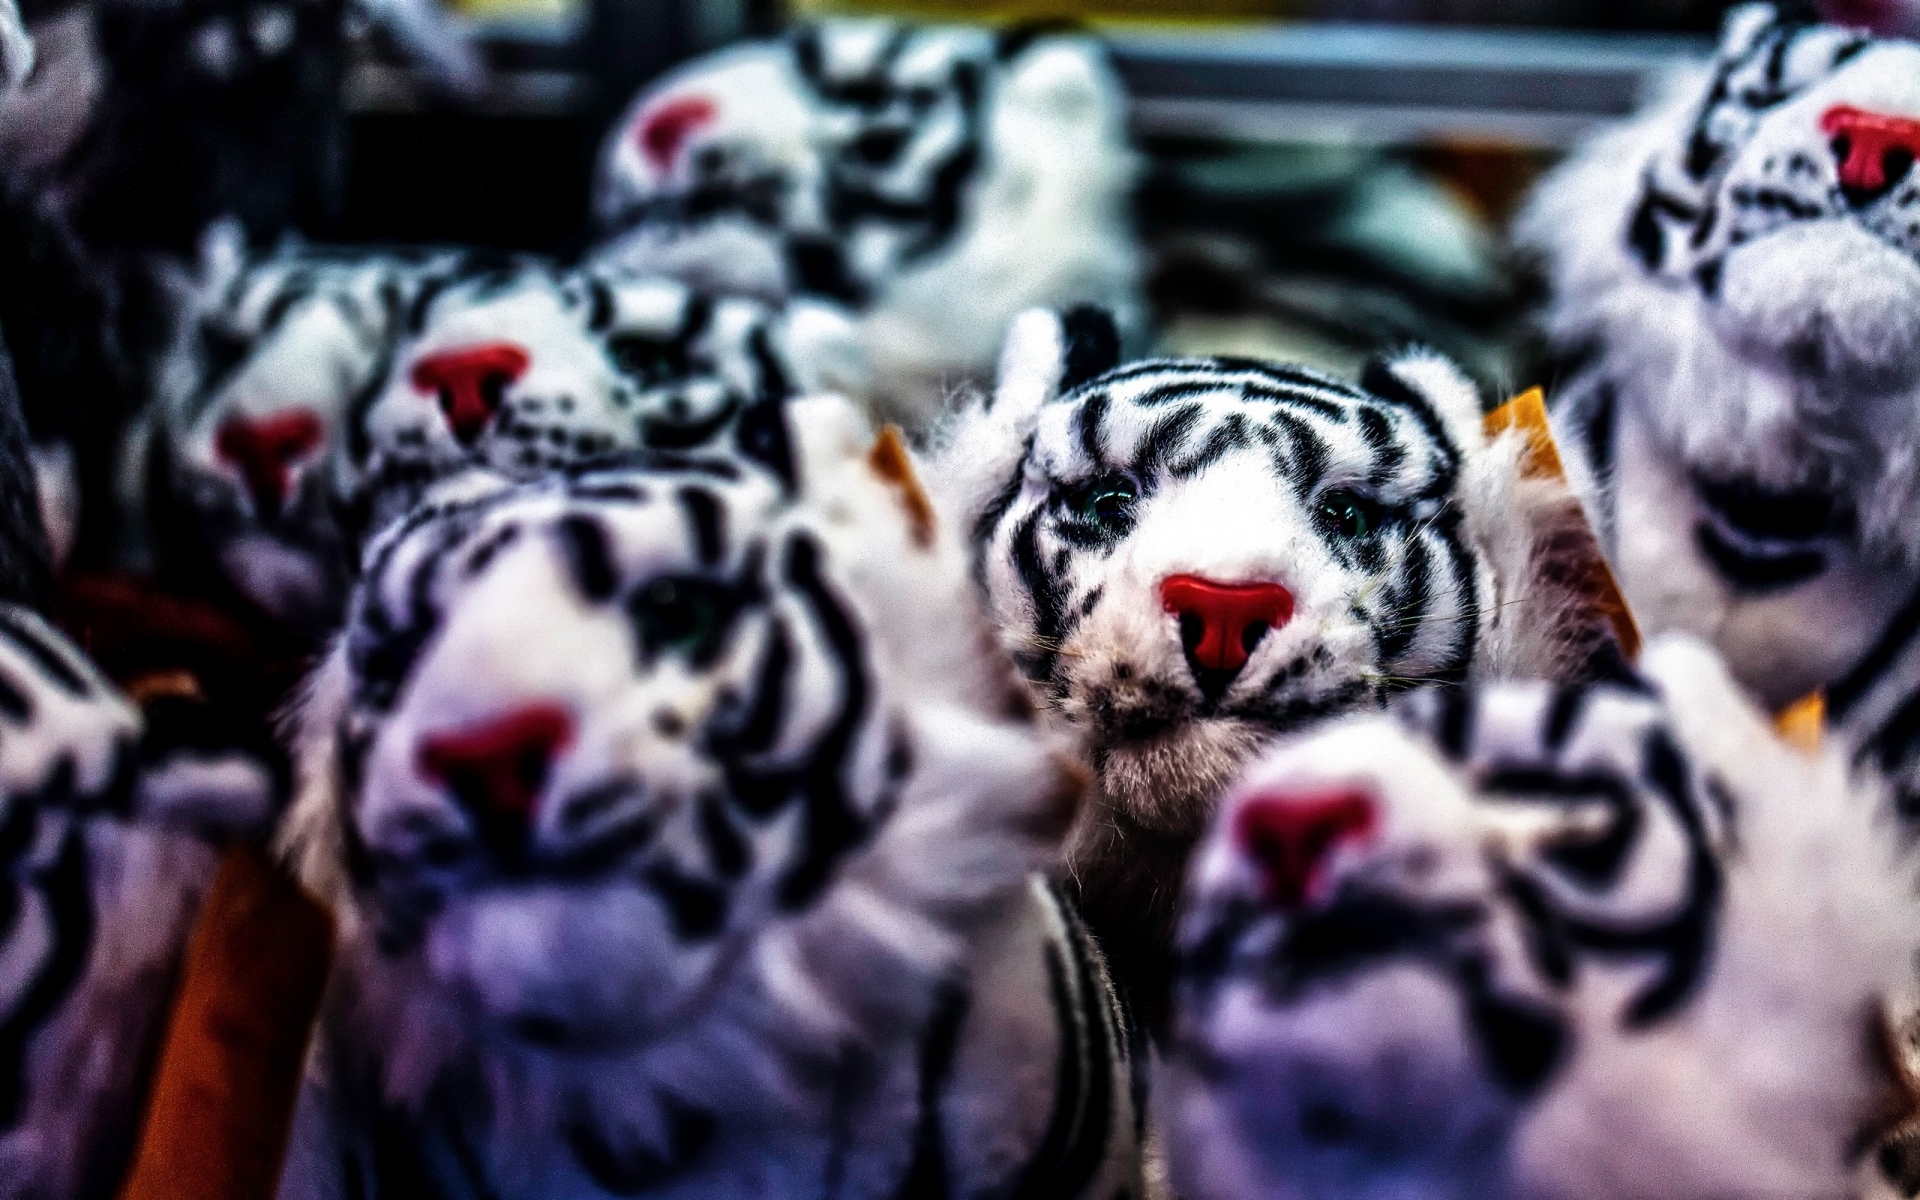 aimals, Cats, Tiger, Cute, Toys, Stuffed, Contrast, Photography, Children Wallpaper